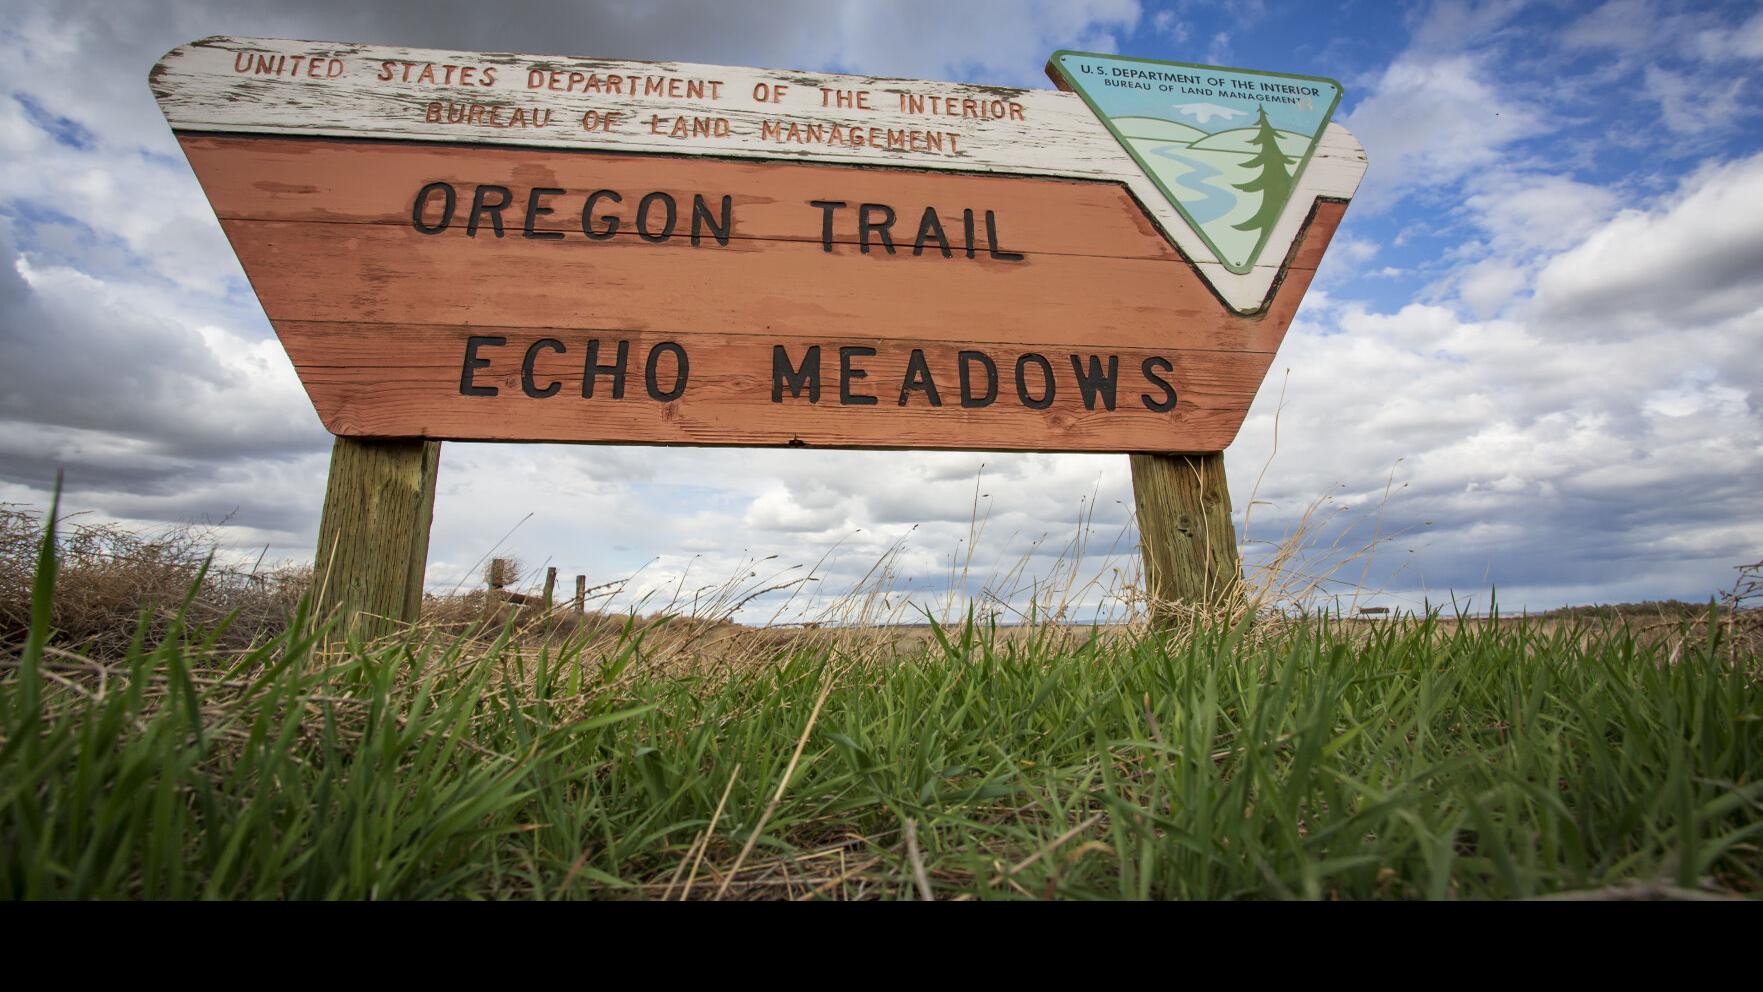 Following the path of the Oregon Trail